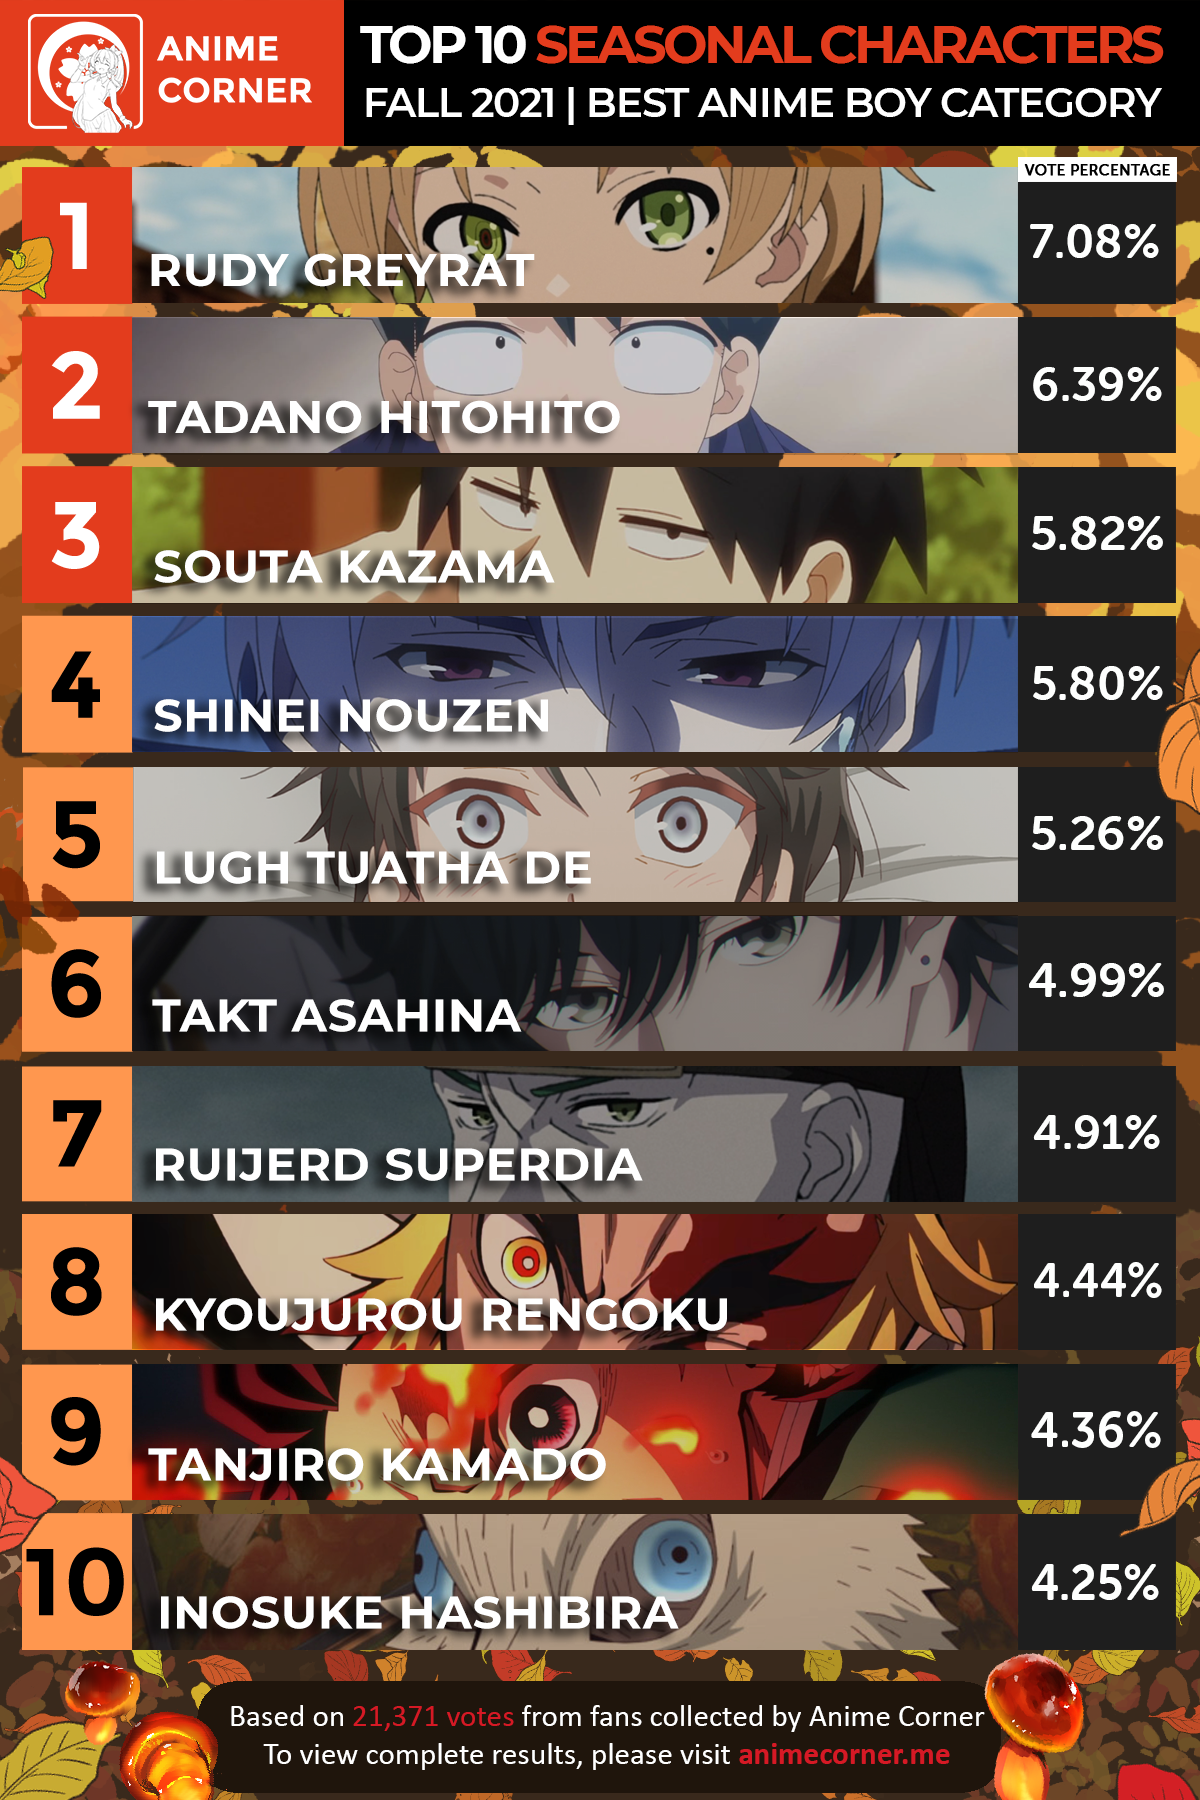 Anime Trending Top 10 Female Characters of the week #6 for Fall 2018 : r/ anime